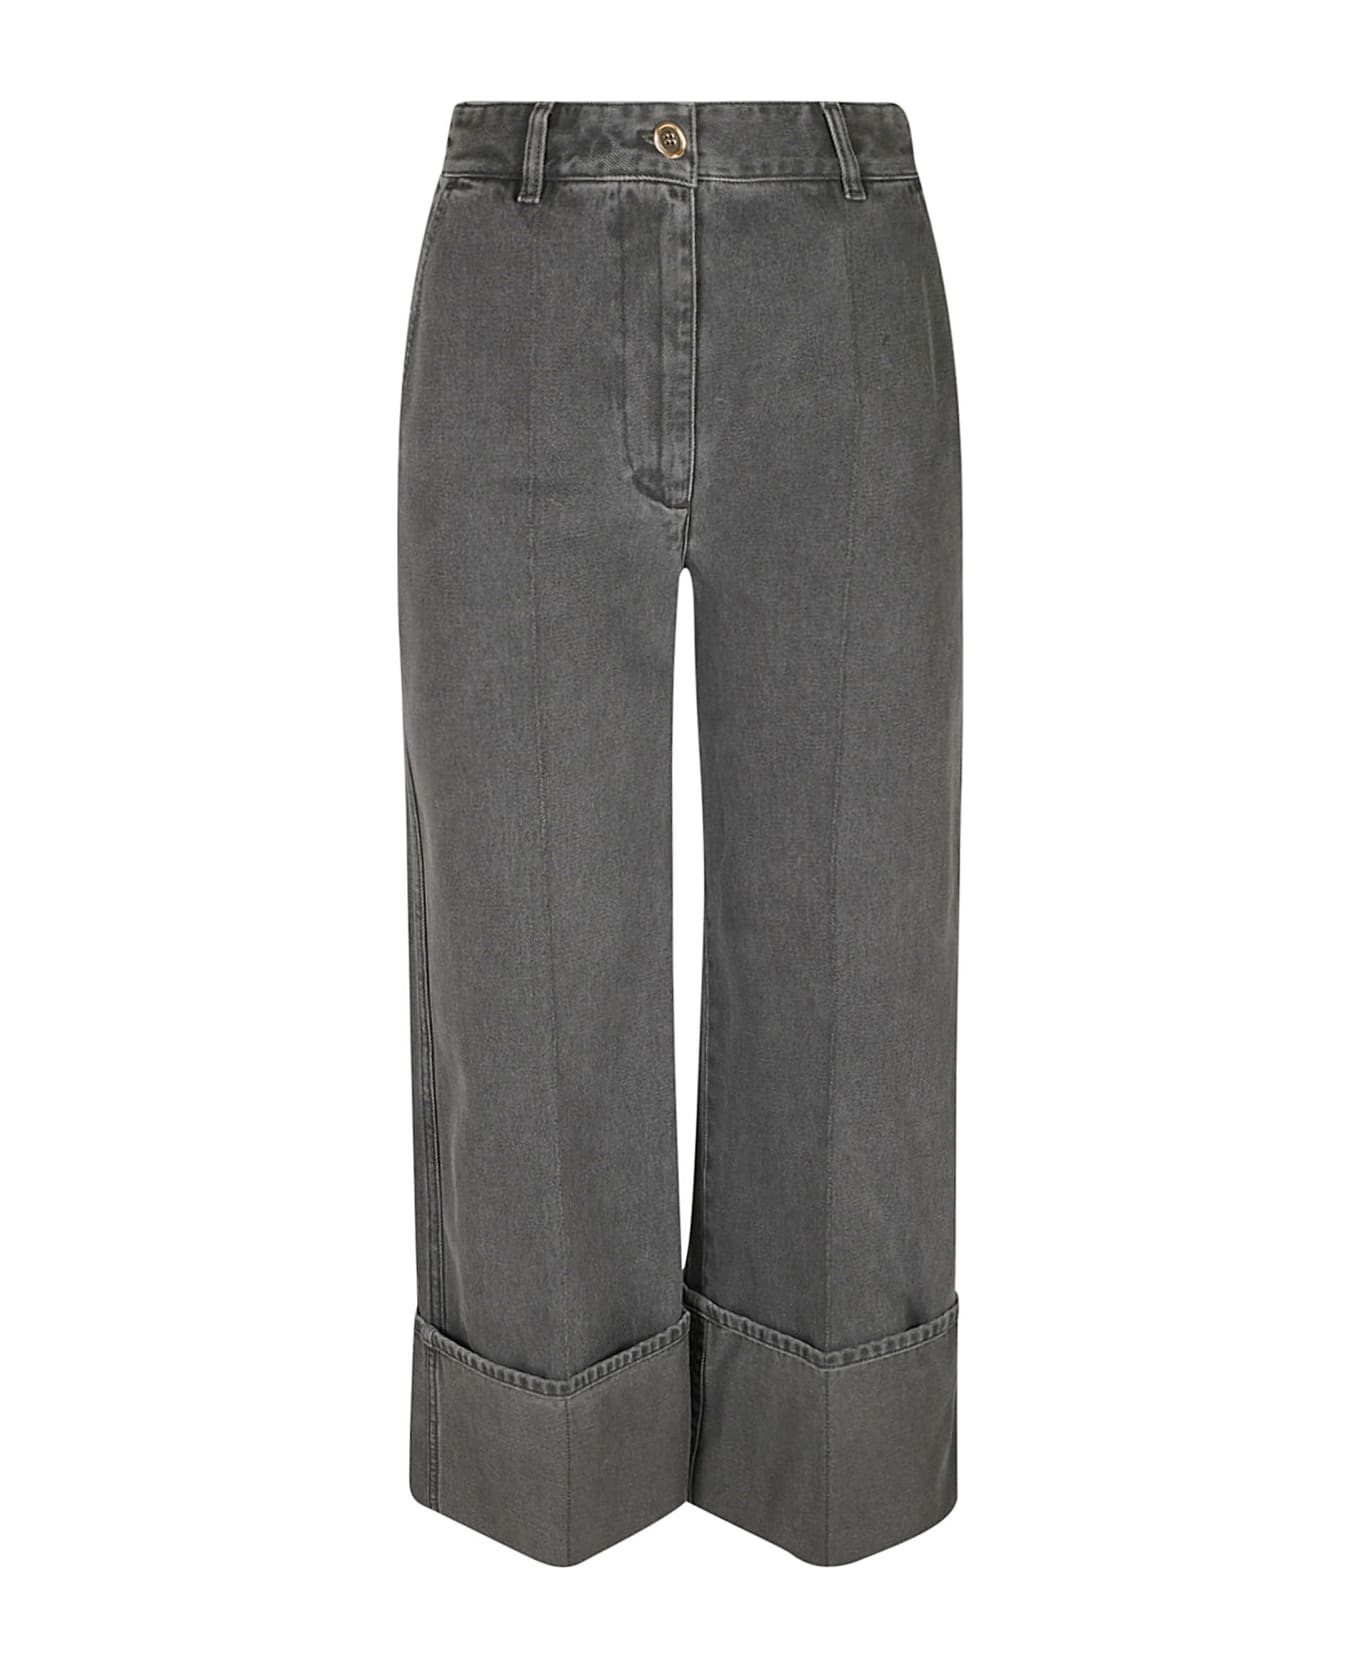 Patou Denim Iconic Trousers - Anthracite